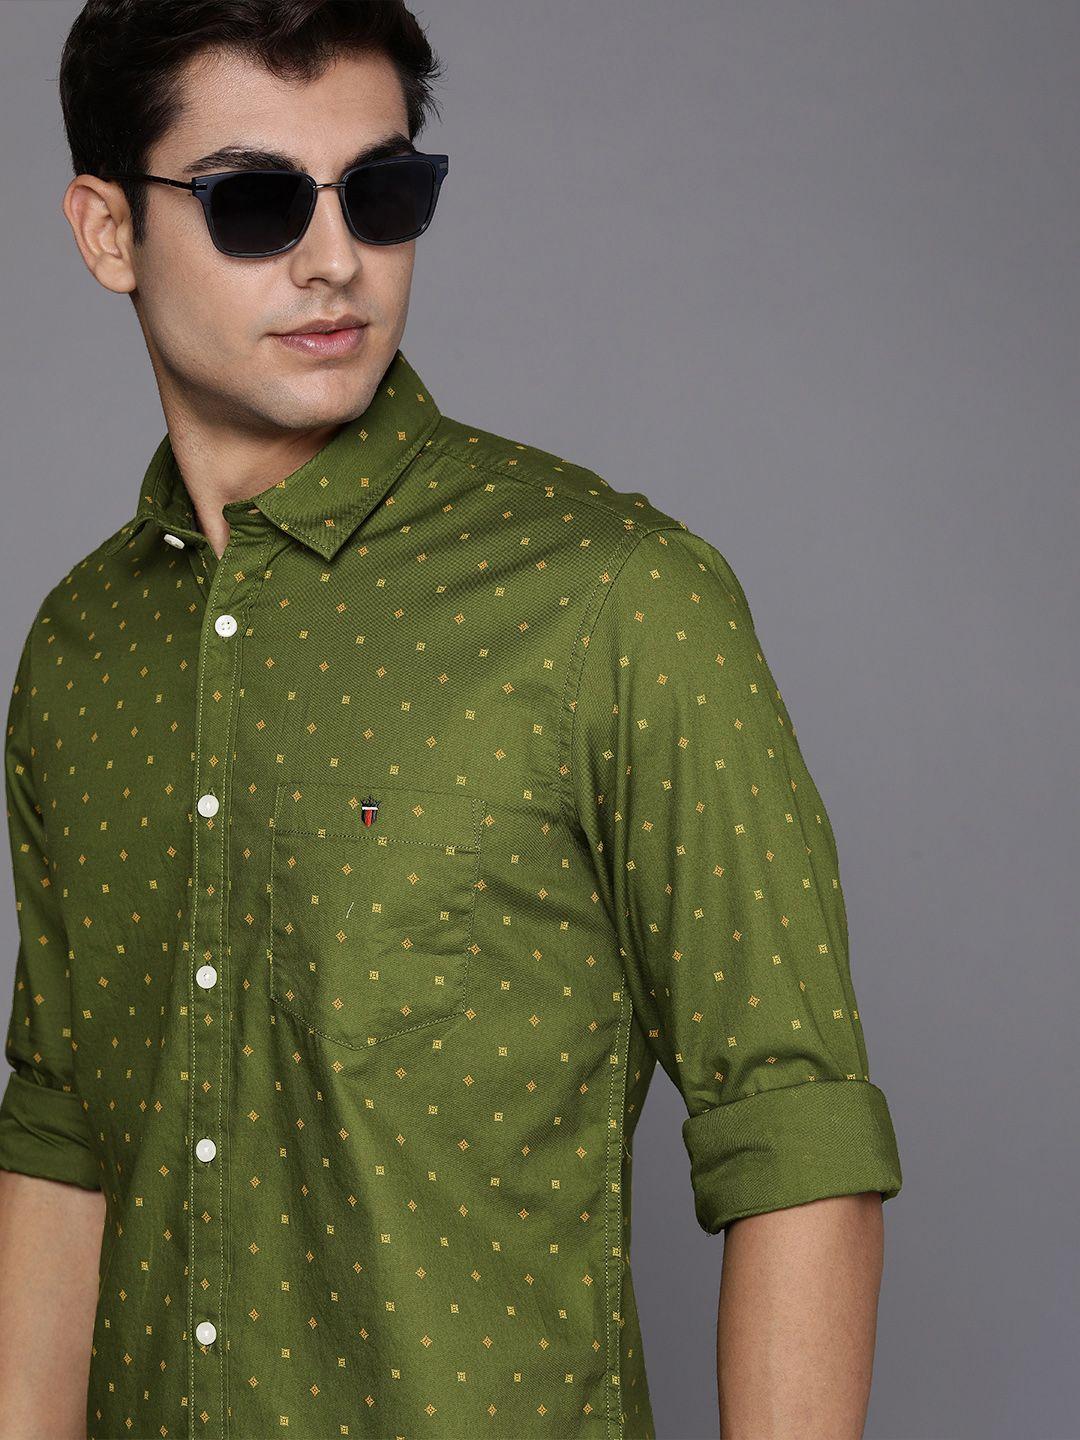 louis philippe jeans men olive green slim fit geometric printed pure cotton casual shirt